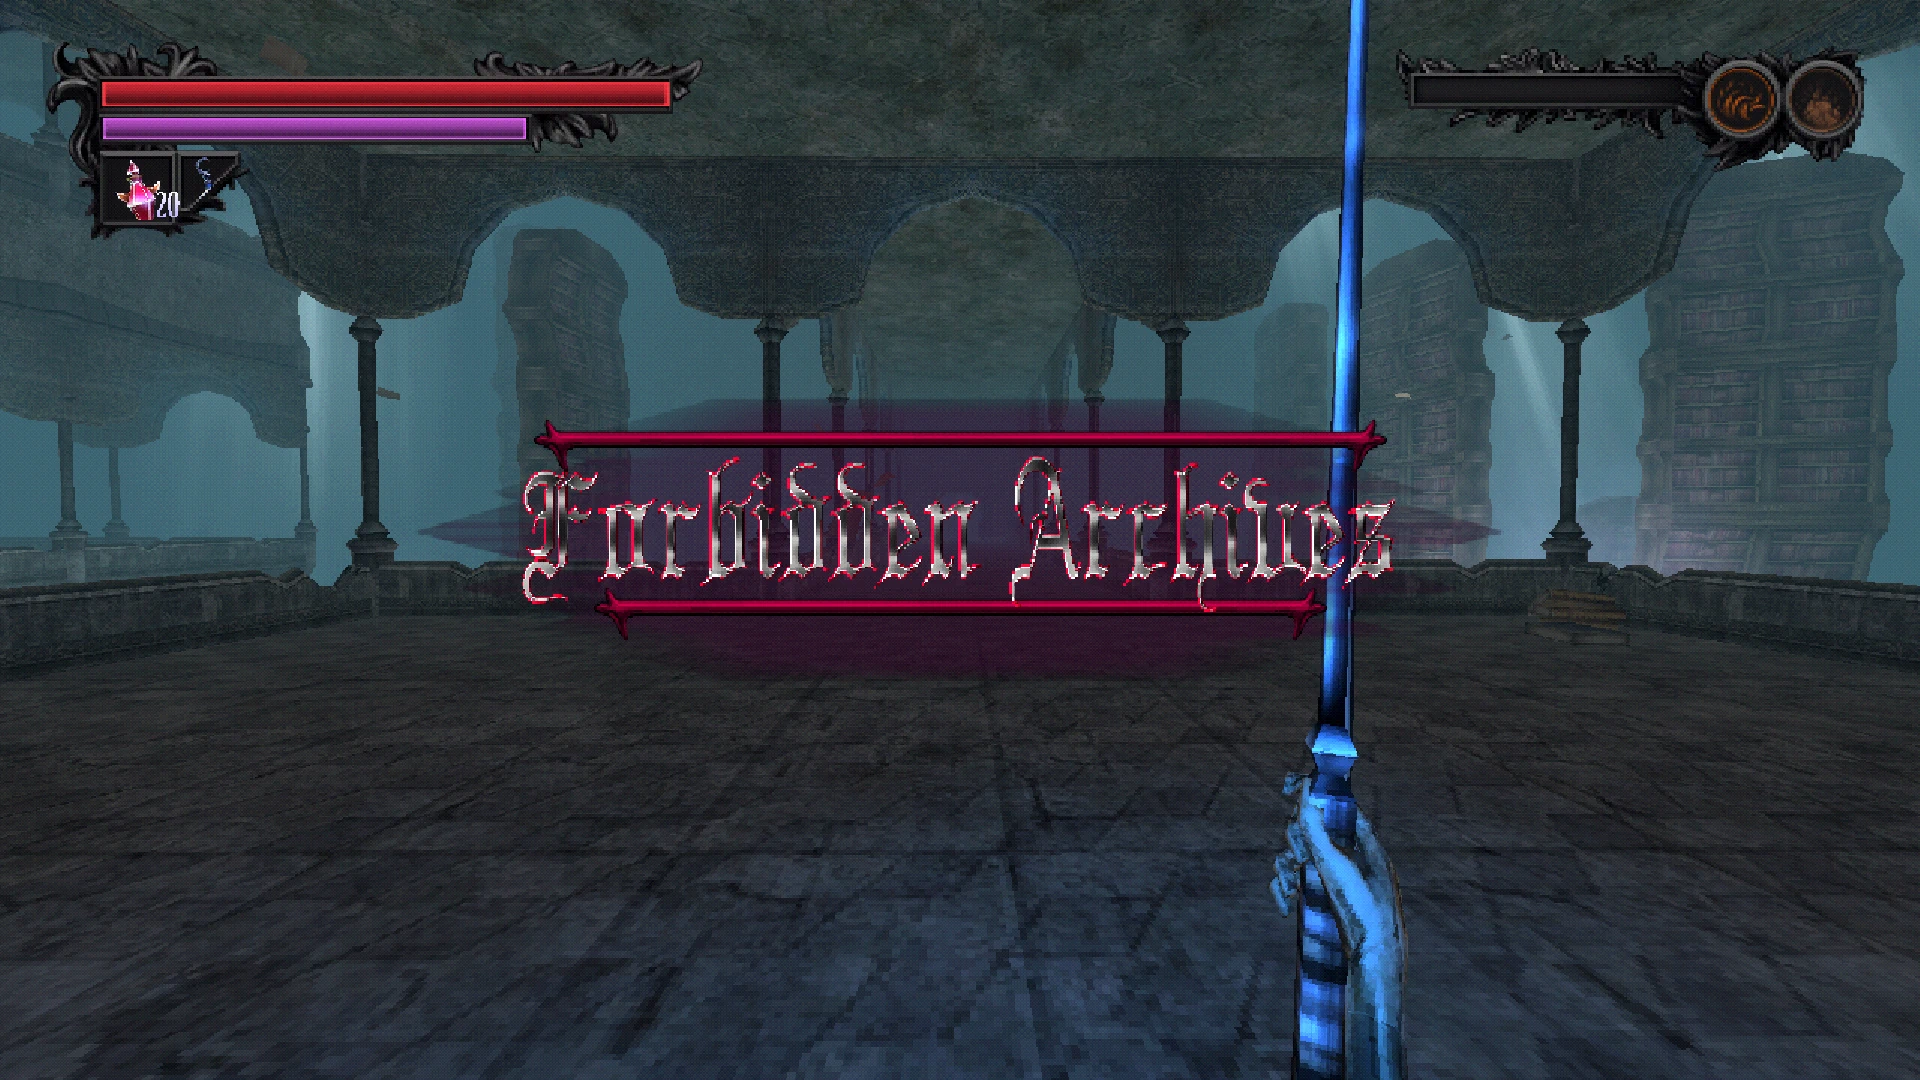 An image of the player entering the Forbidden Archives, an incredibly tall gothic library area.